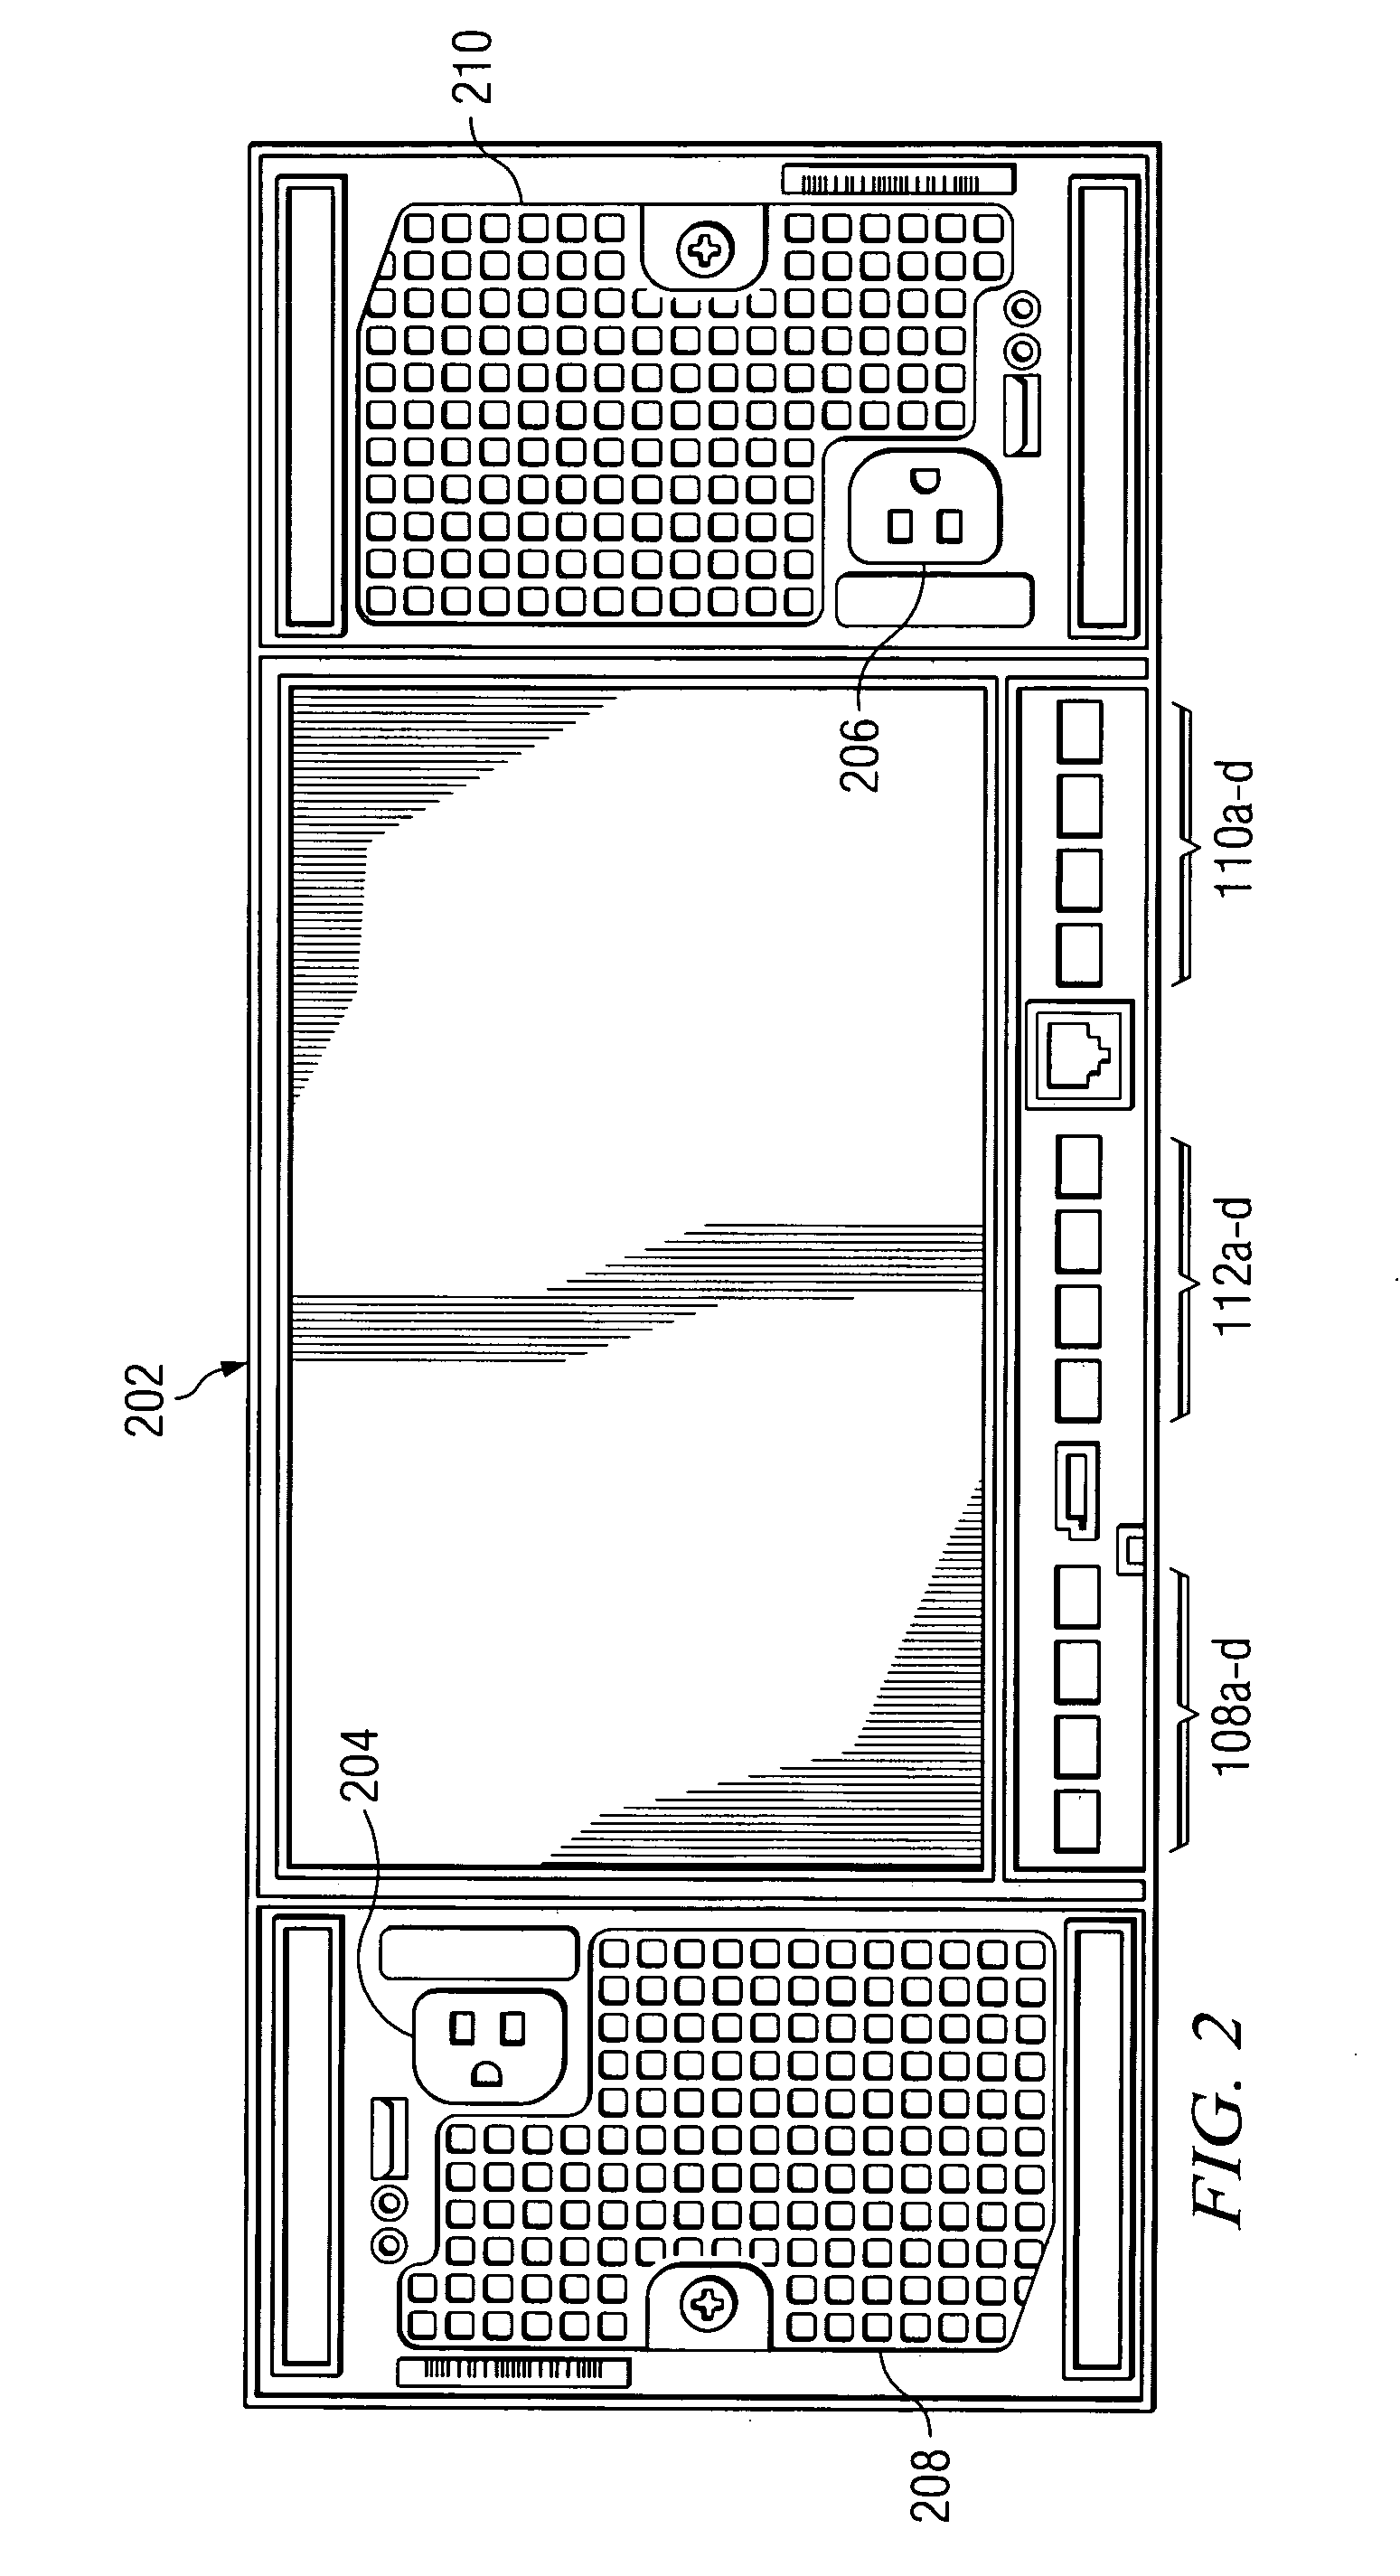 Method for preventing data corruption due to improper storage controller connections